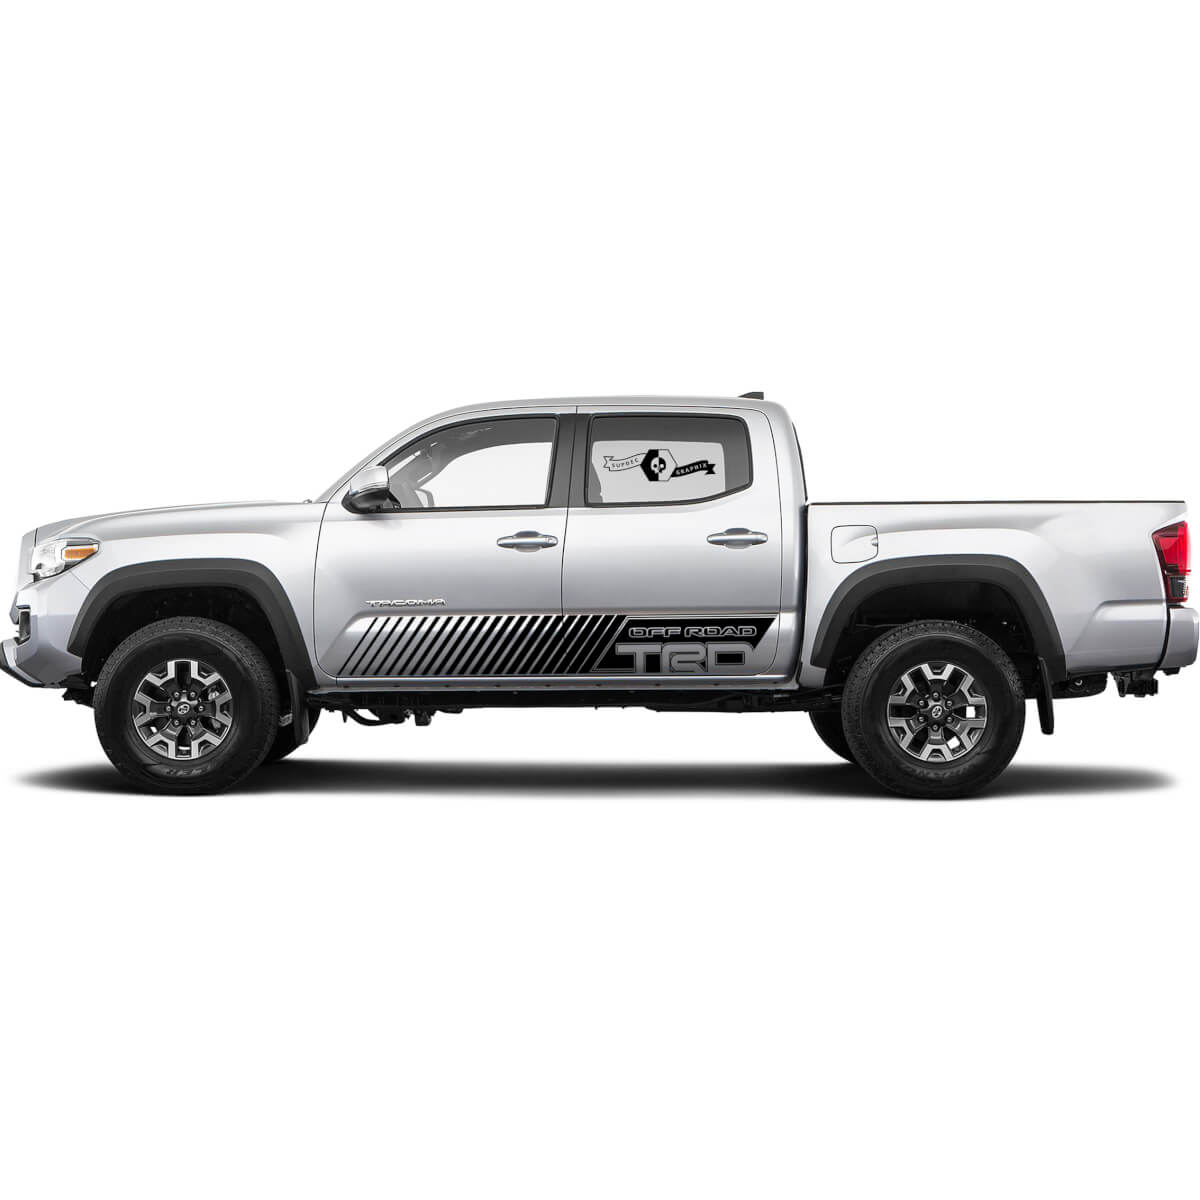 TRD Off Road Lines Wippe Panel Bettseite Side Vinyl Aufkleber Aufkleber Fitting Toyota Tacoma Tundra Alle Jahre 2